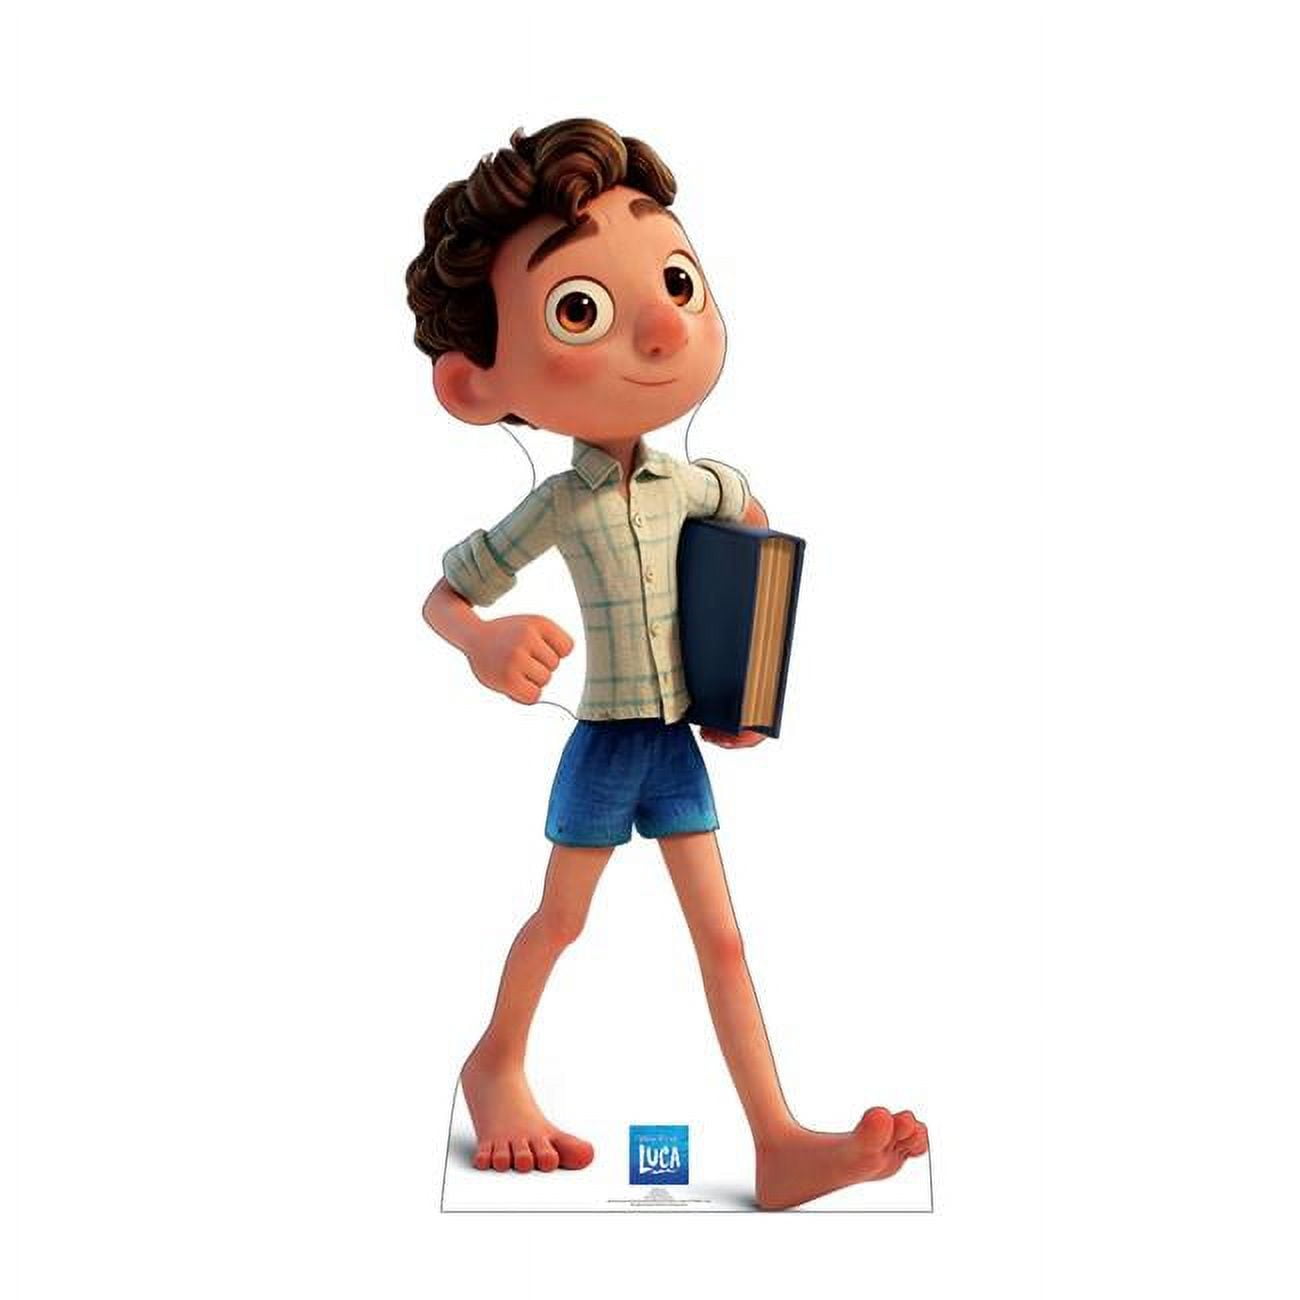 pixar luca aged up characters｜TikTok Search